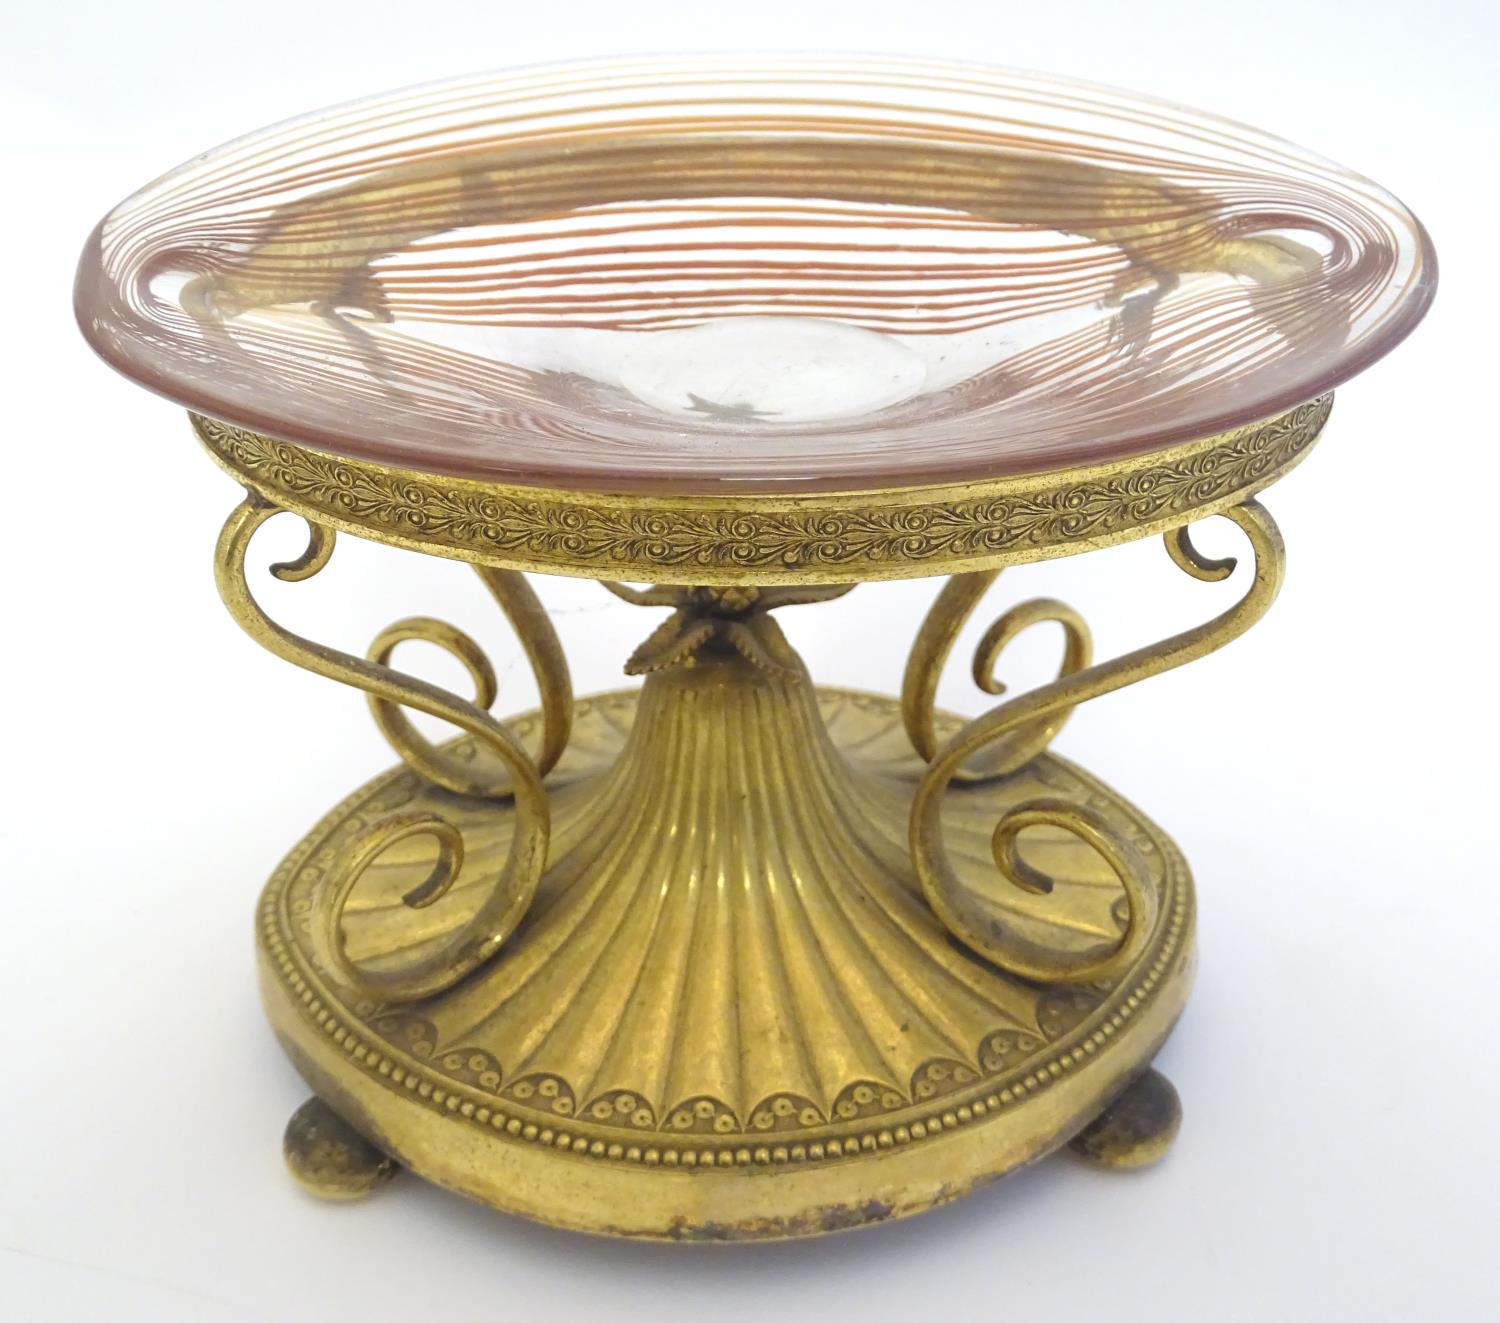 A c.1903 Elkington & Co. gilt metal oval centrepiece stand with scrolling decoration and central - Image 10 of 22